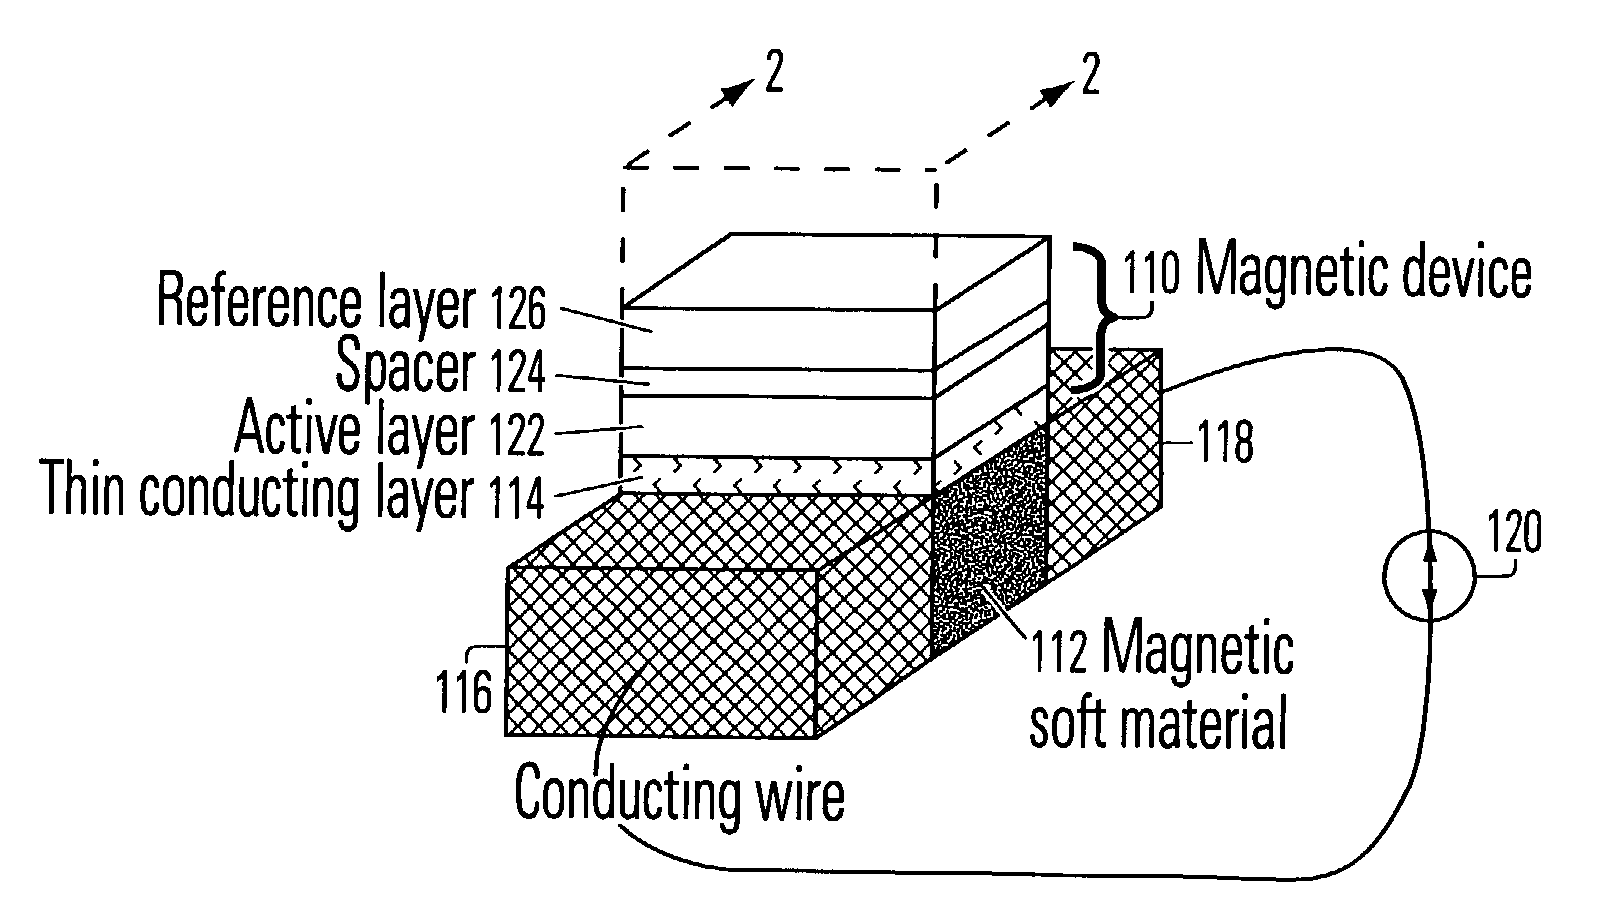 Bistable magnetic device using soft magnetic intermediary material